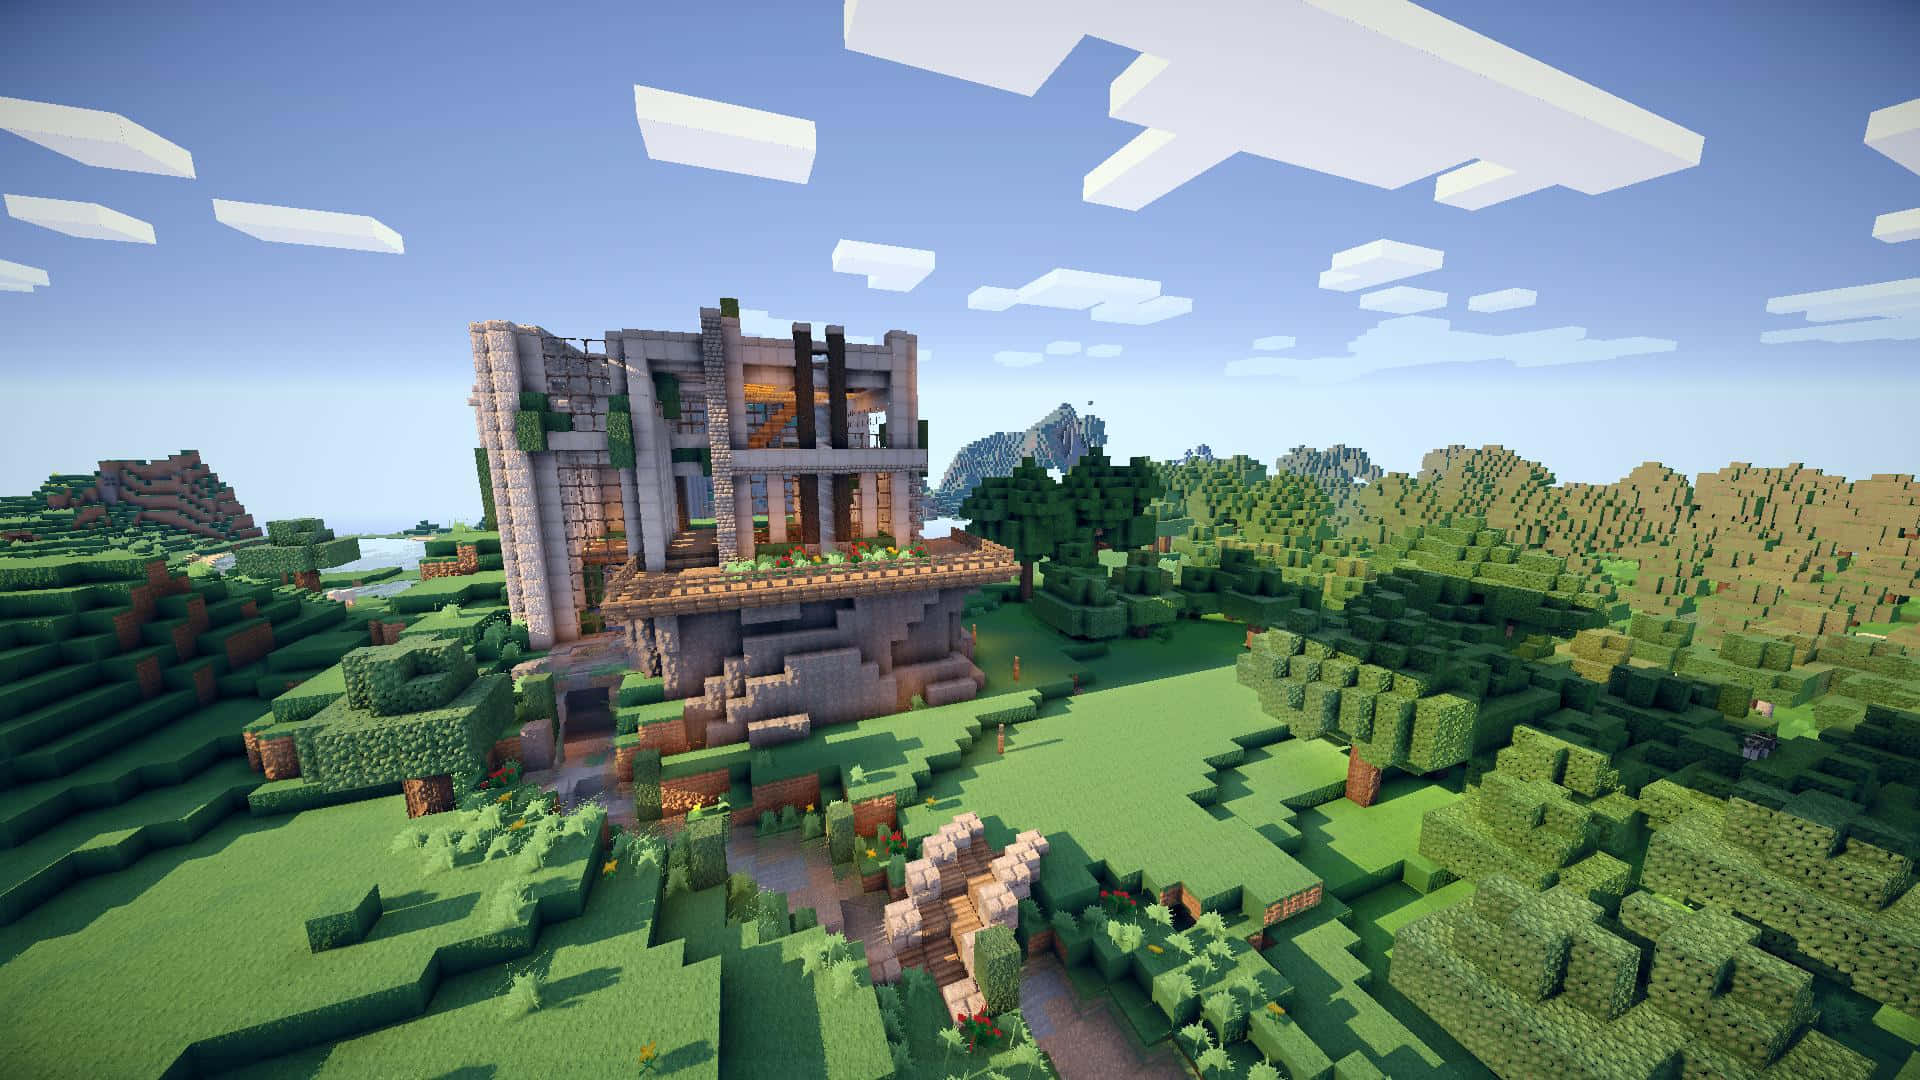 "Explore a Unique World with Minecraft Houses"